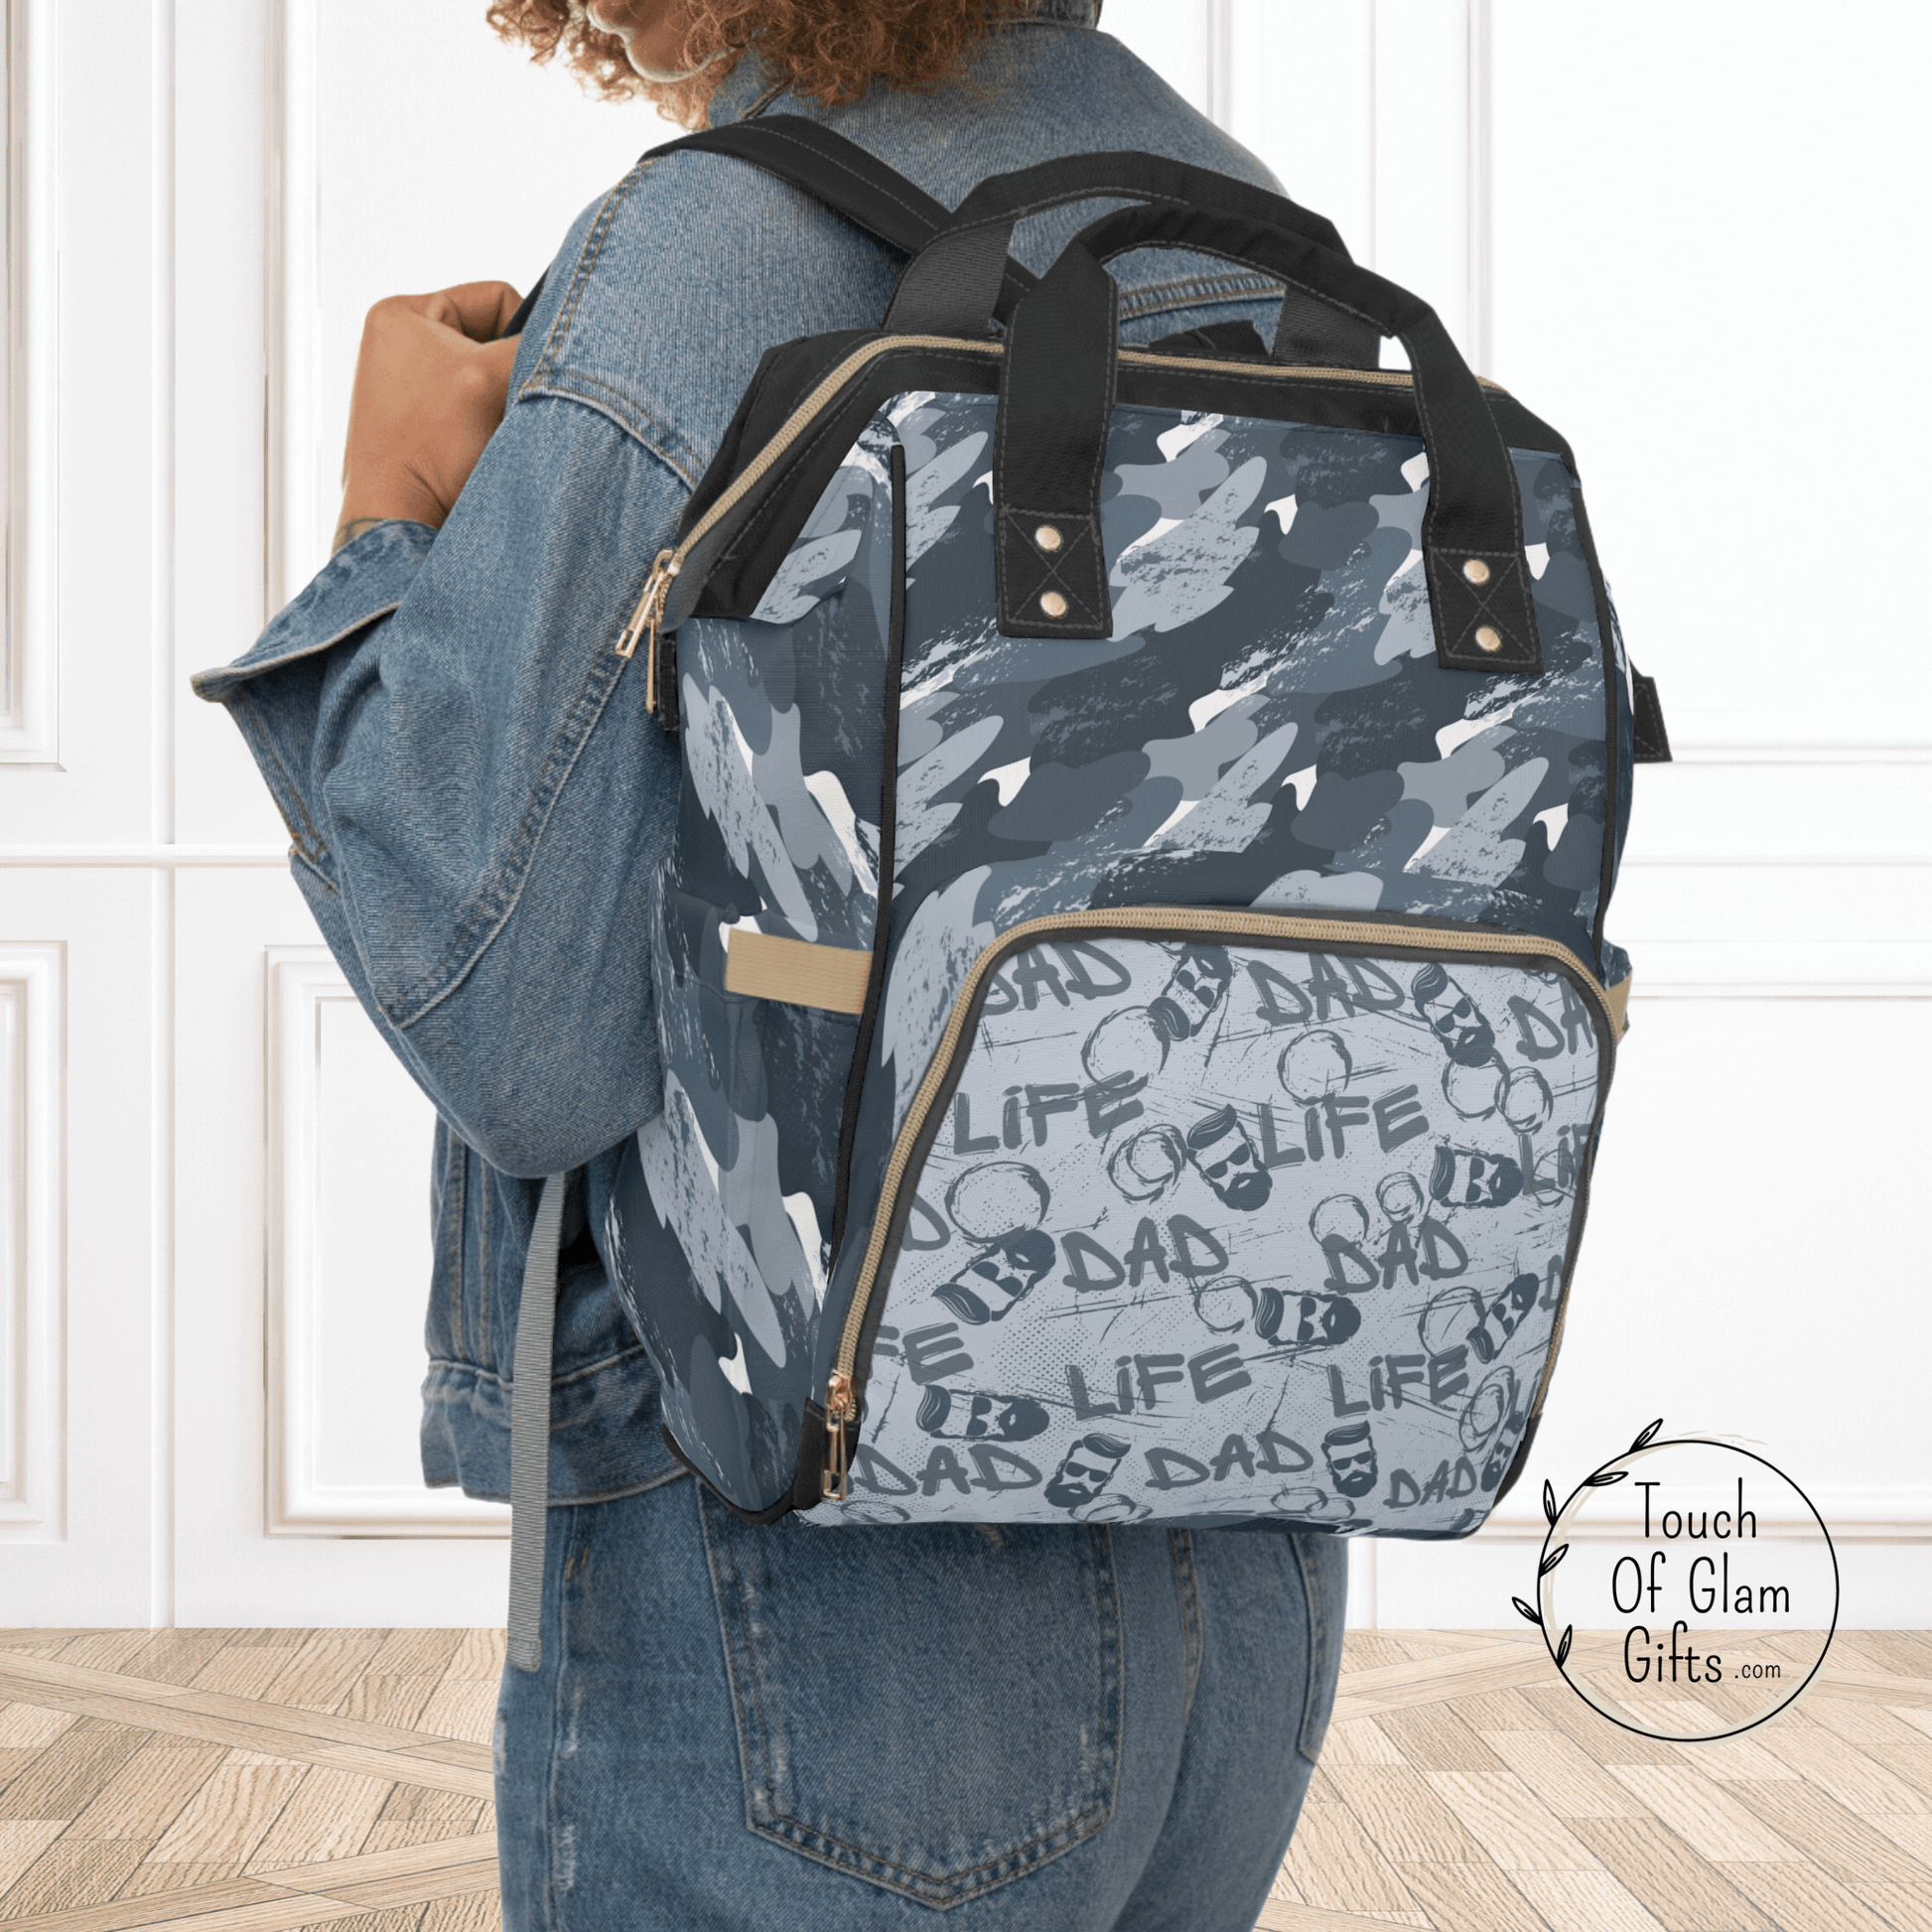 The perfect gift for new dads. This diaper bag backpack has a masculine design for men that get stuck holding the diaper bag. The backpack design allows fathers to be hands free while tending to their kids.